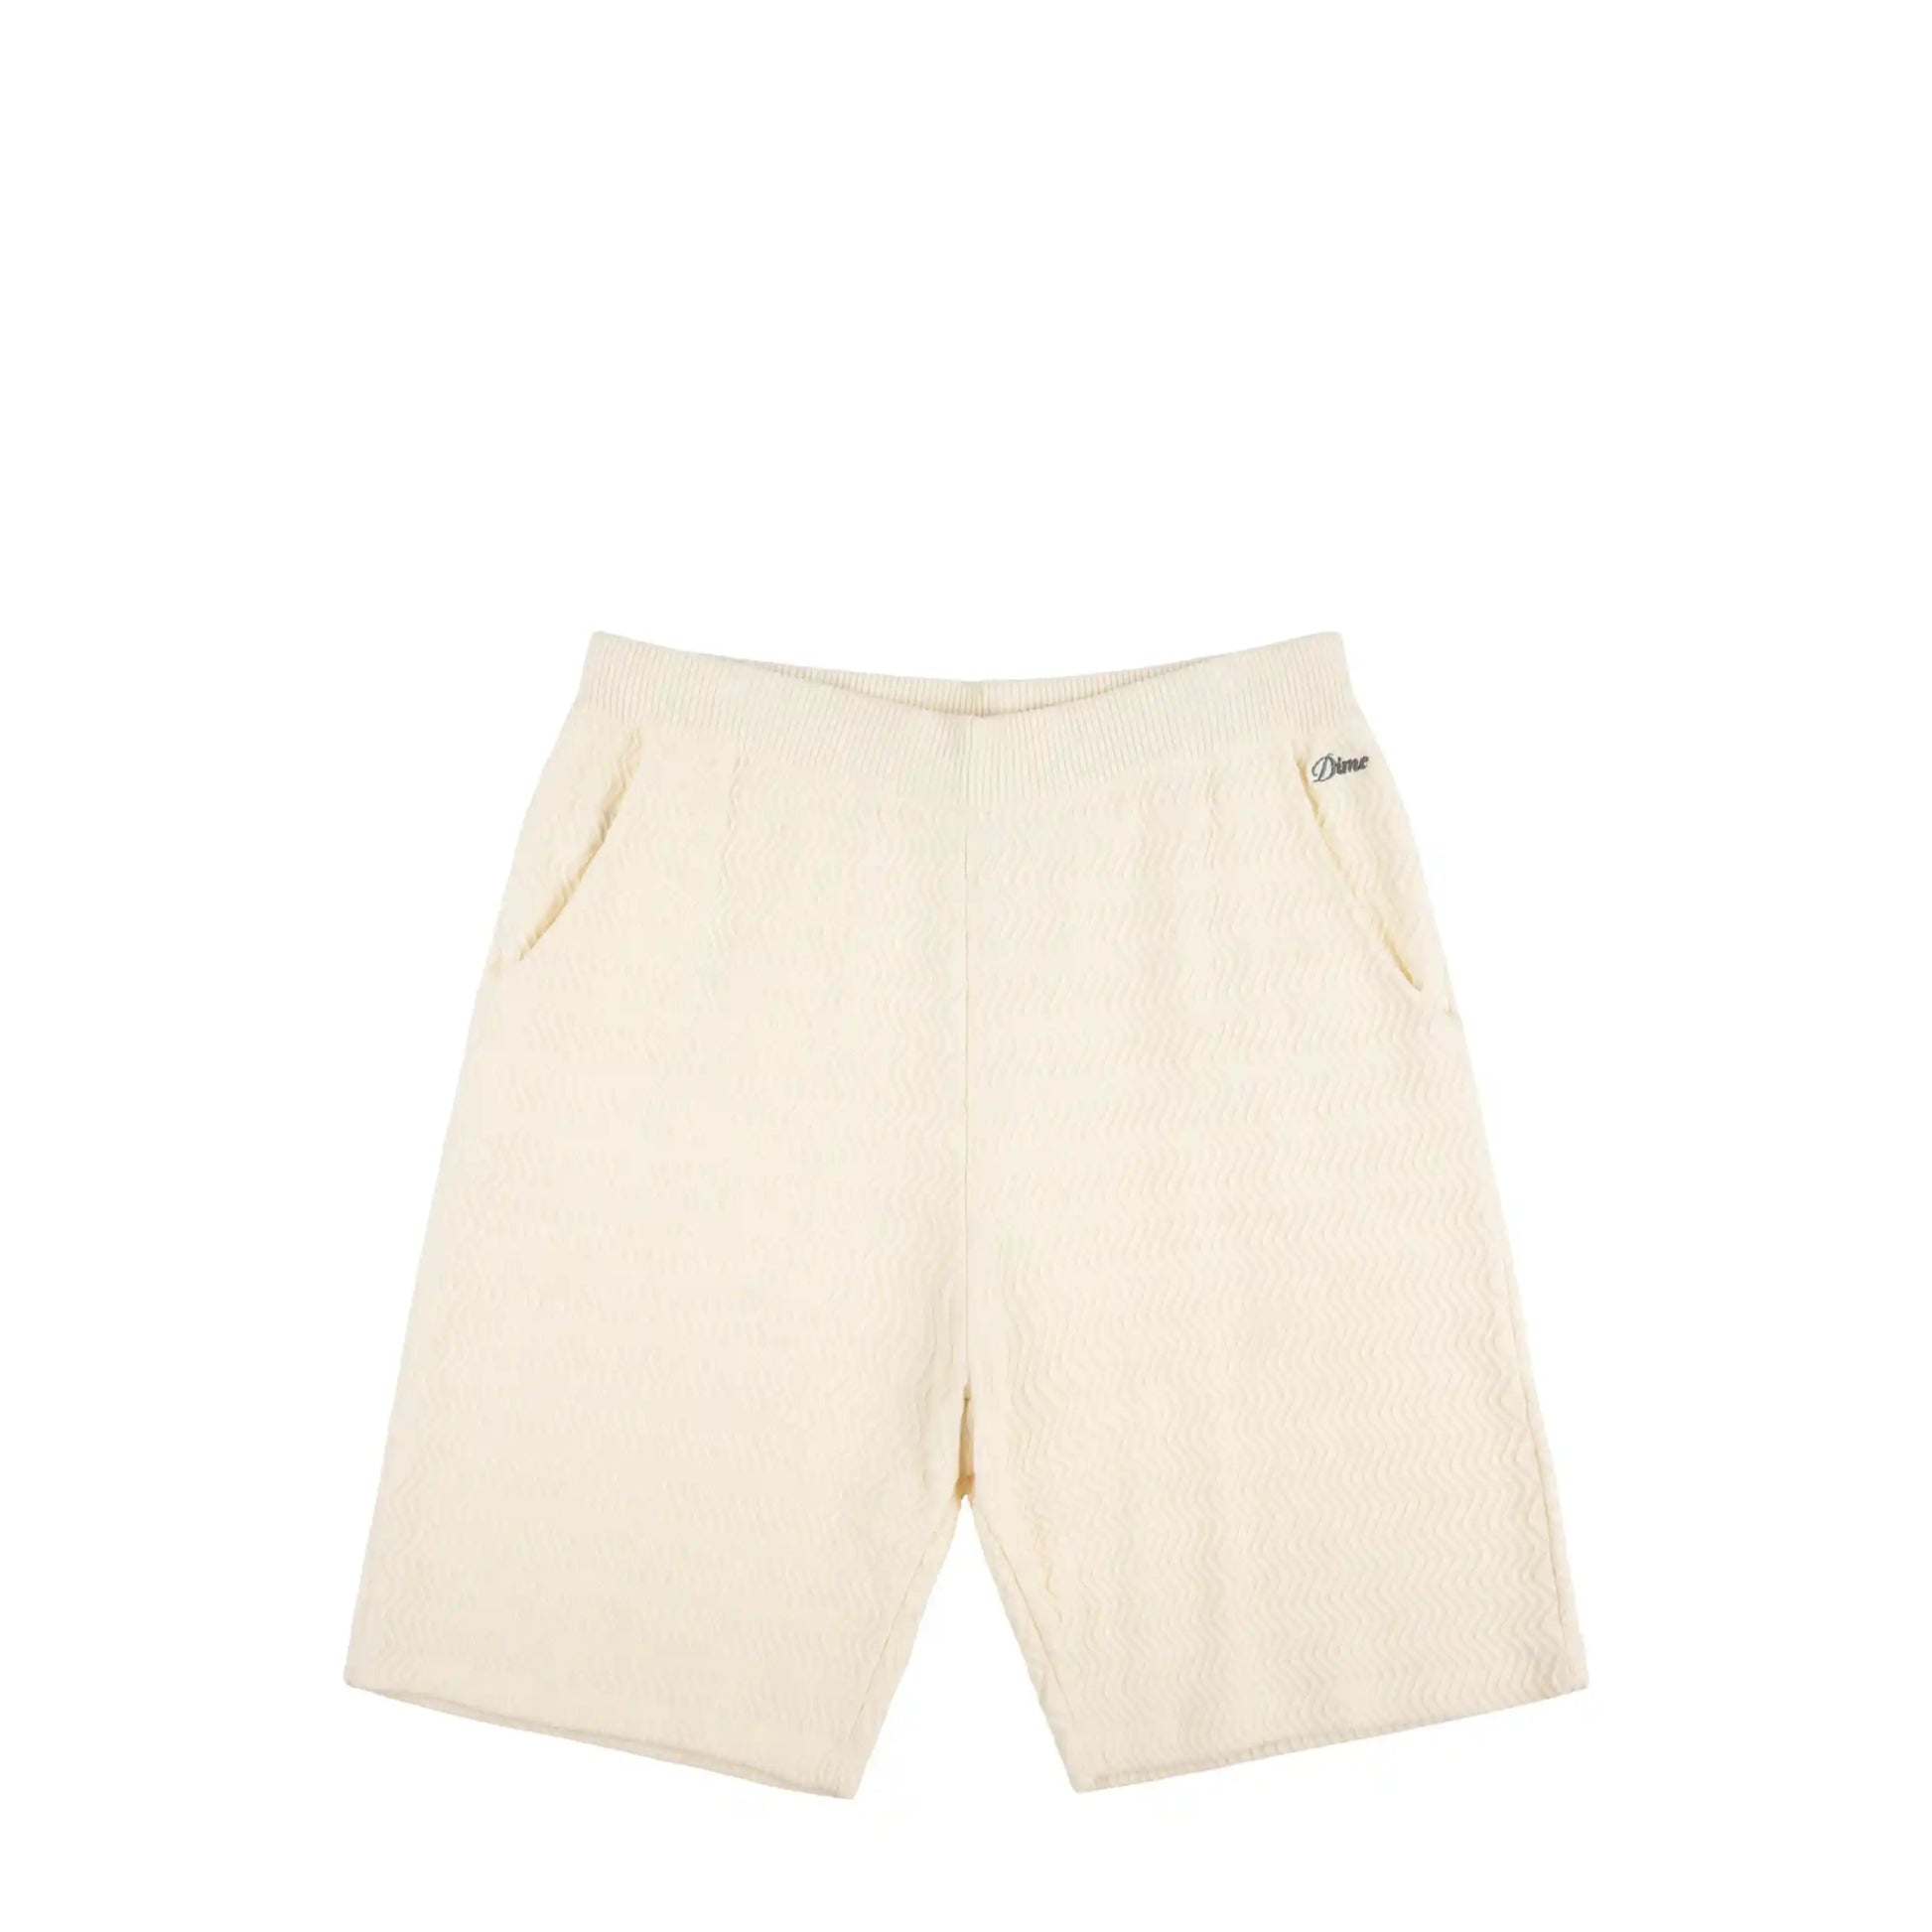 Dime Wave Cable Knit Shorts, cream - Tiki Room Skateboards - 1